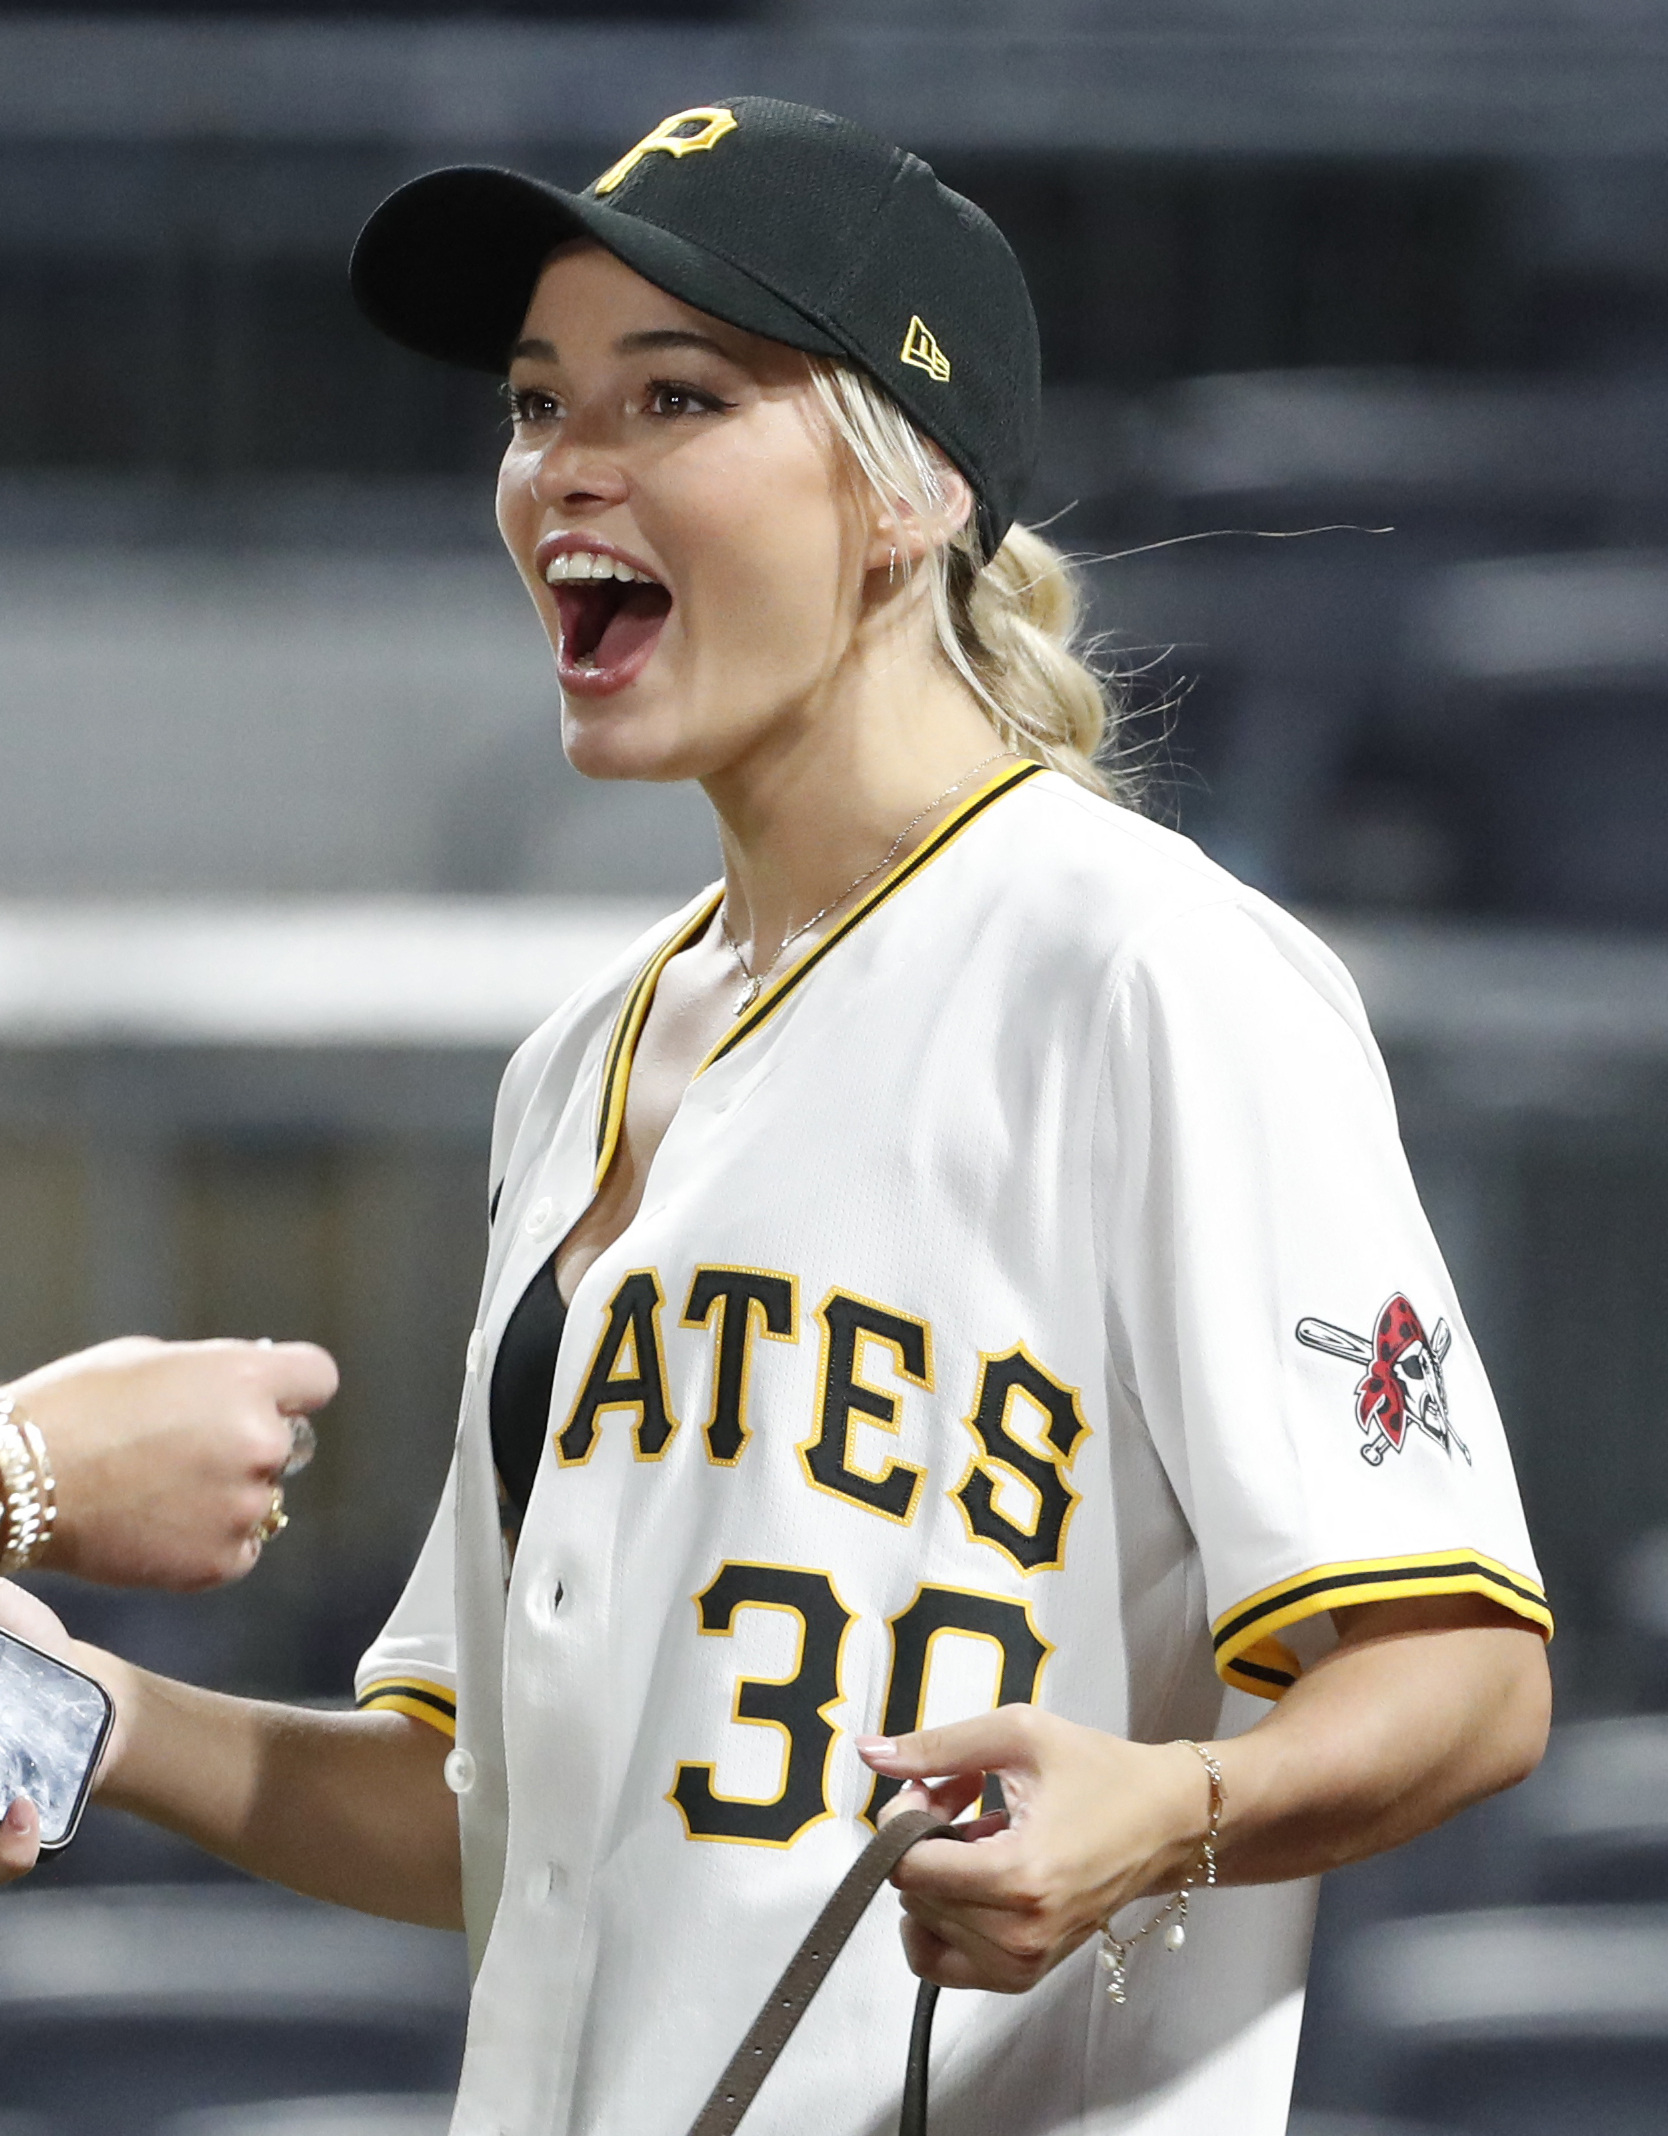 Dunne has been a regular at boyfriend Paul Skenes' games for the Pittsburgh Pirates